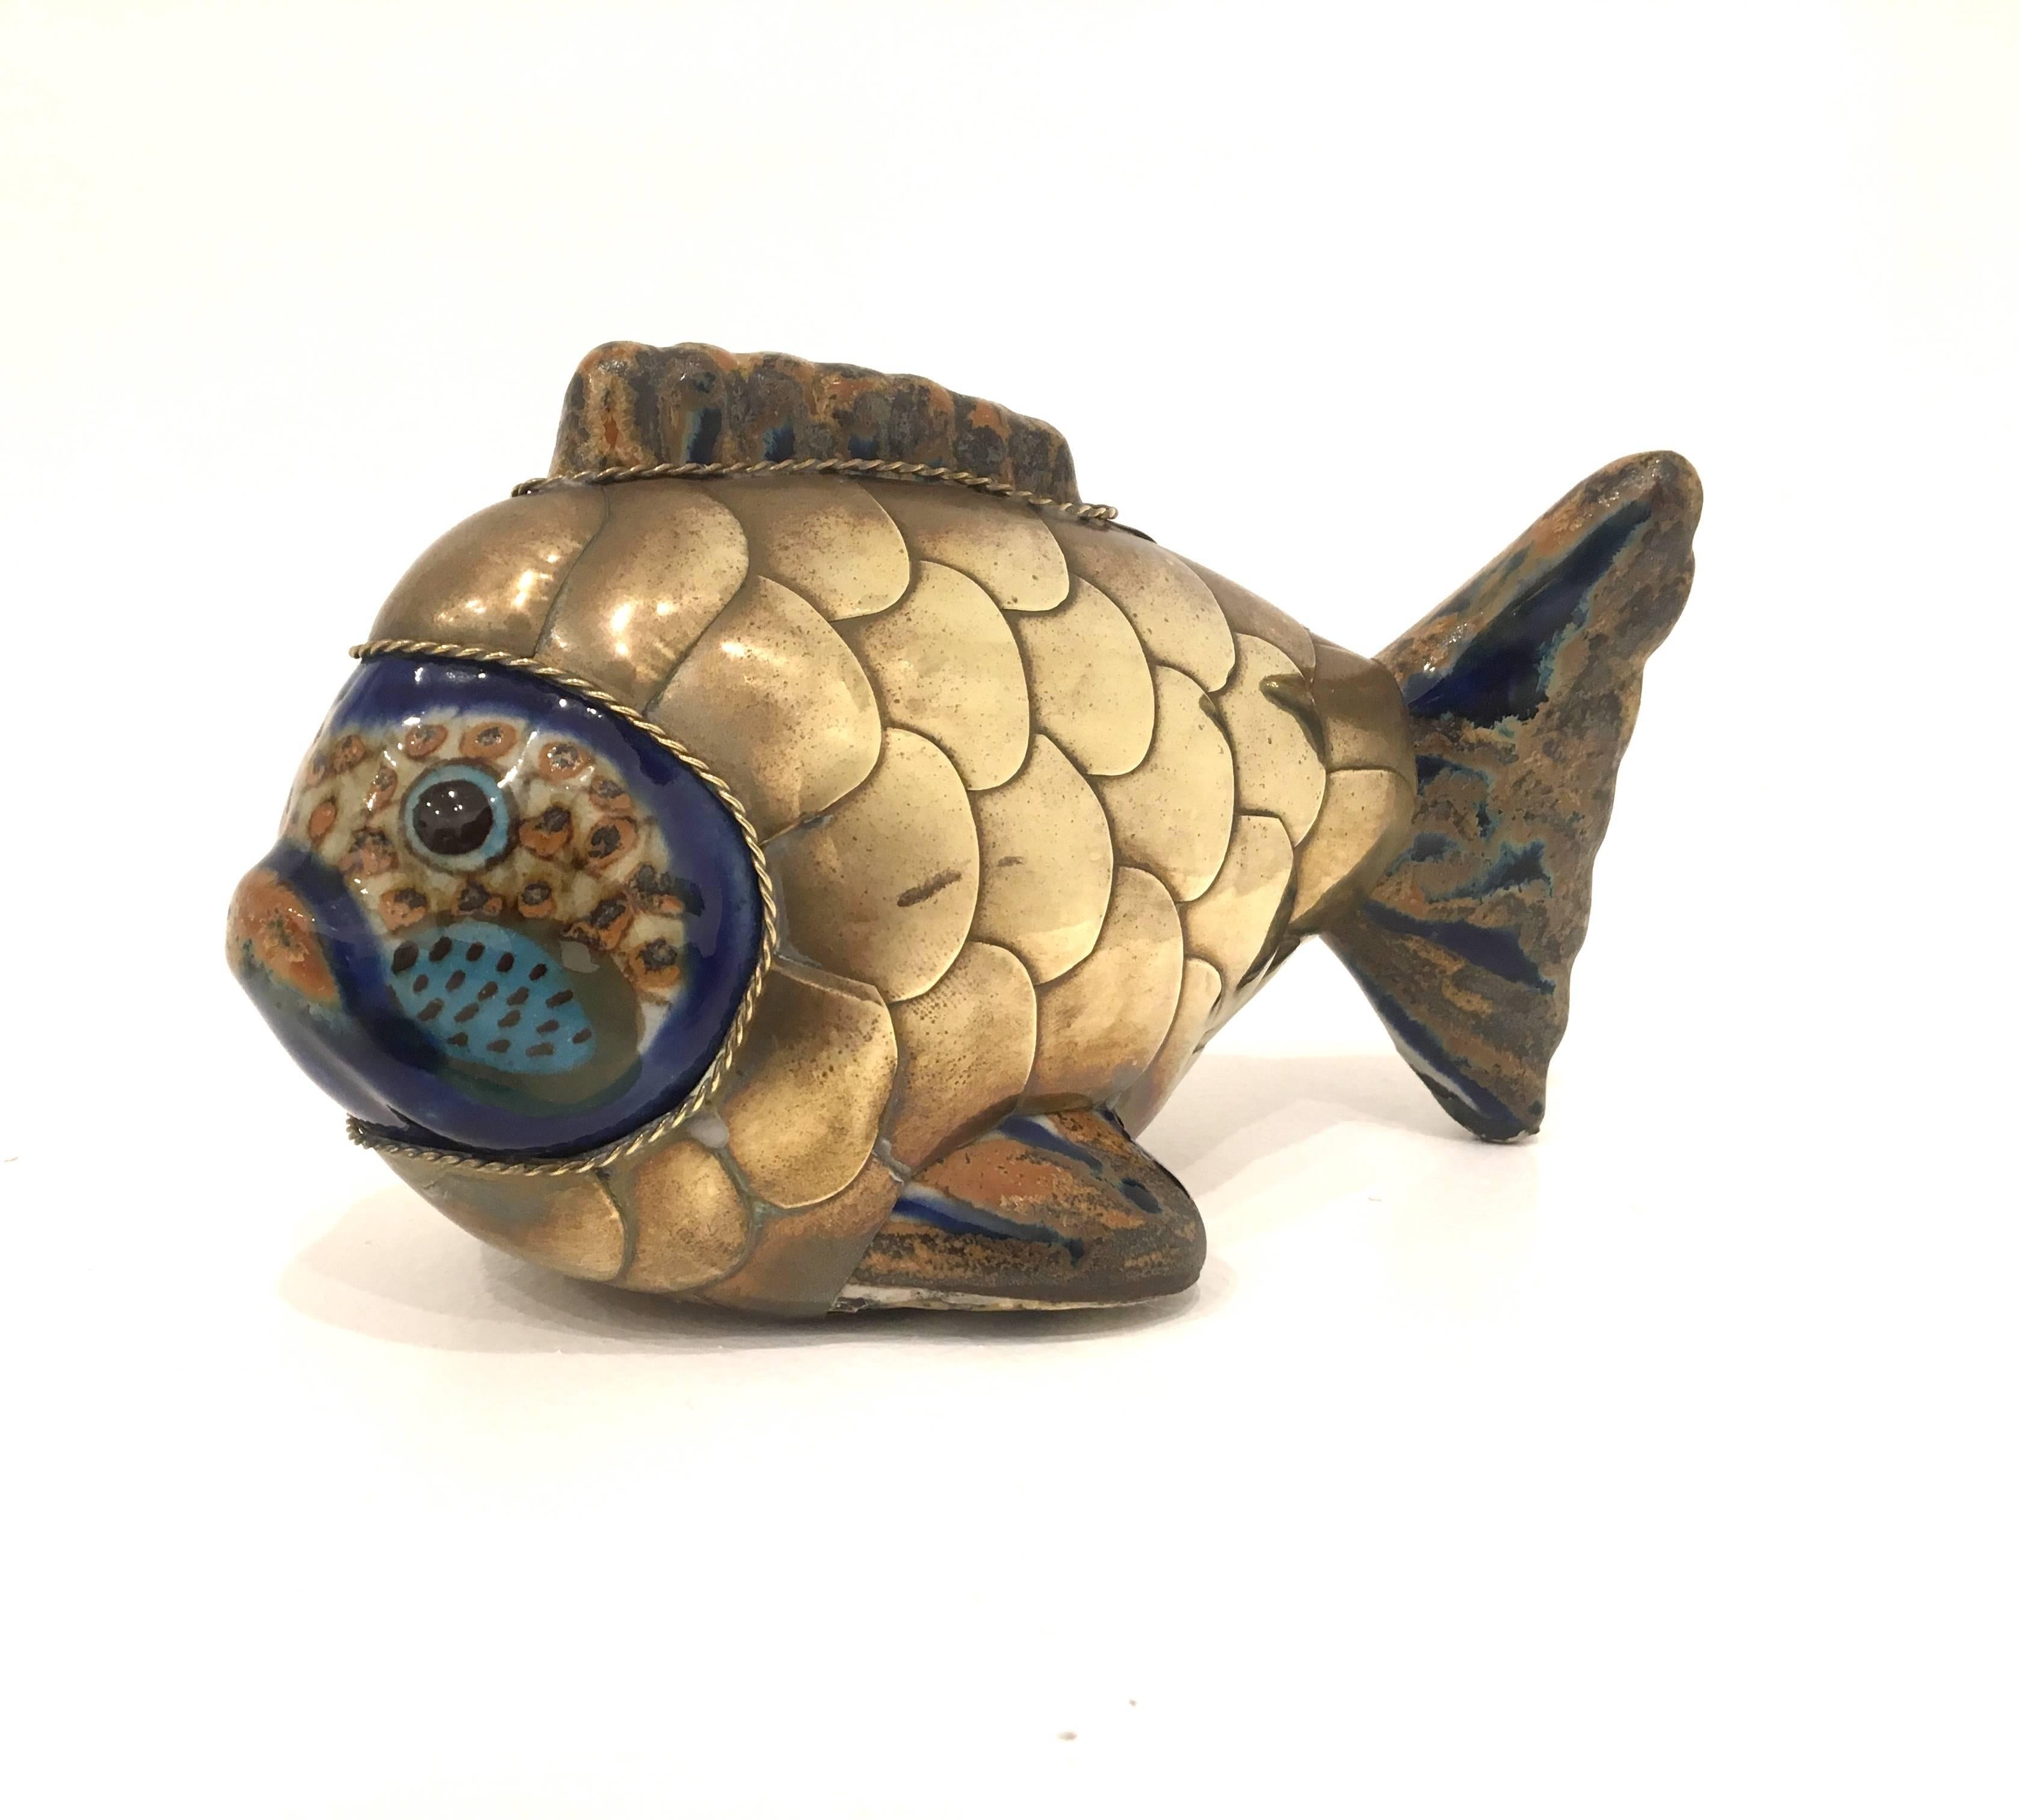 Whimsical fish sculpture attributed to Mexican Sculptor Sergio Bustamante in brass and ceramic.